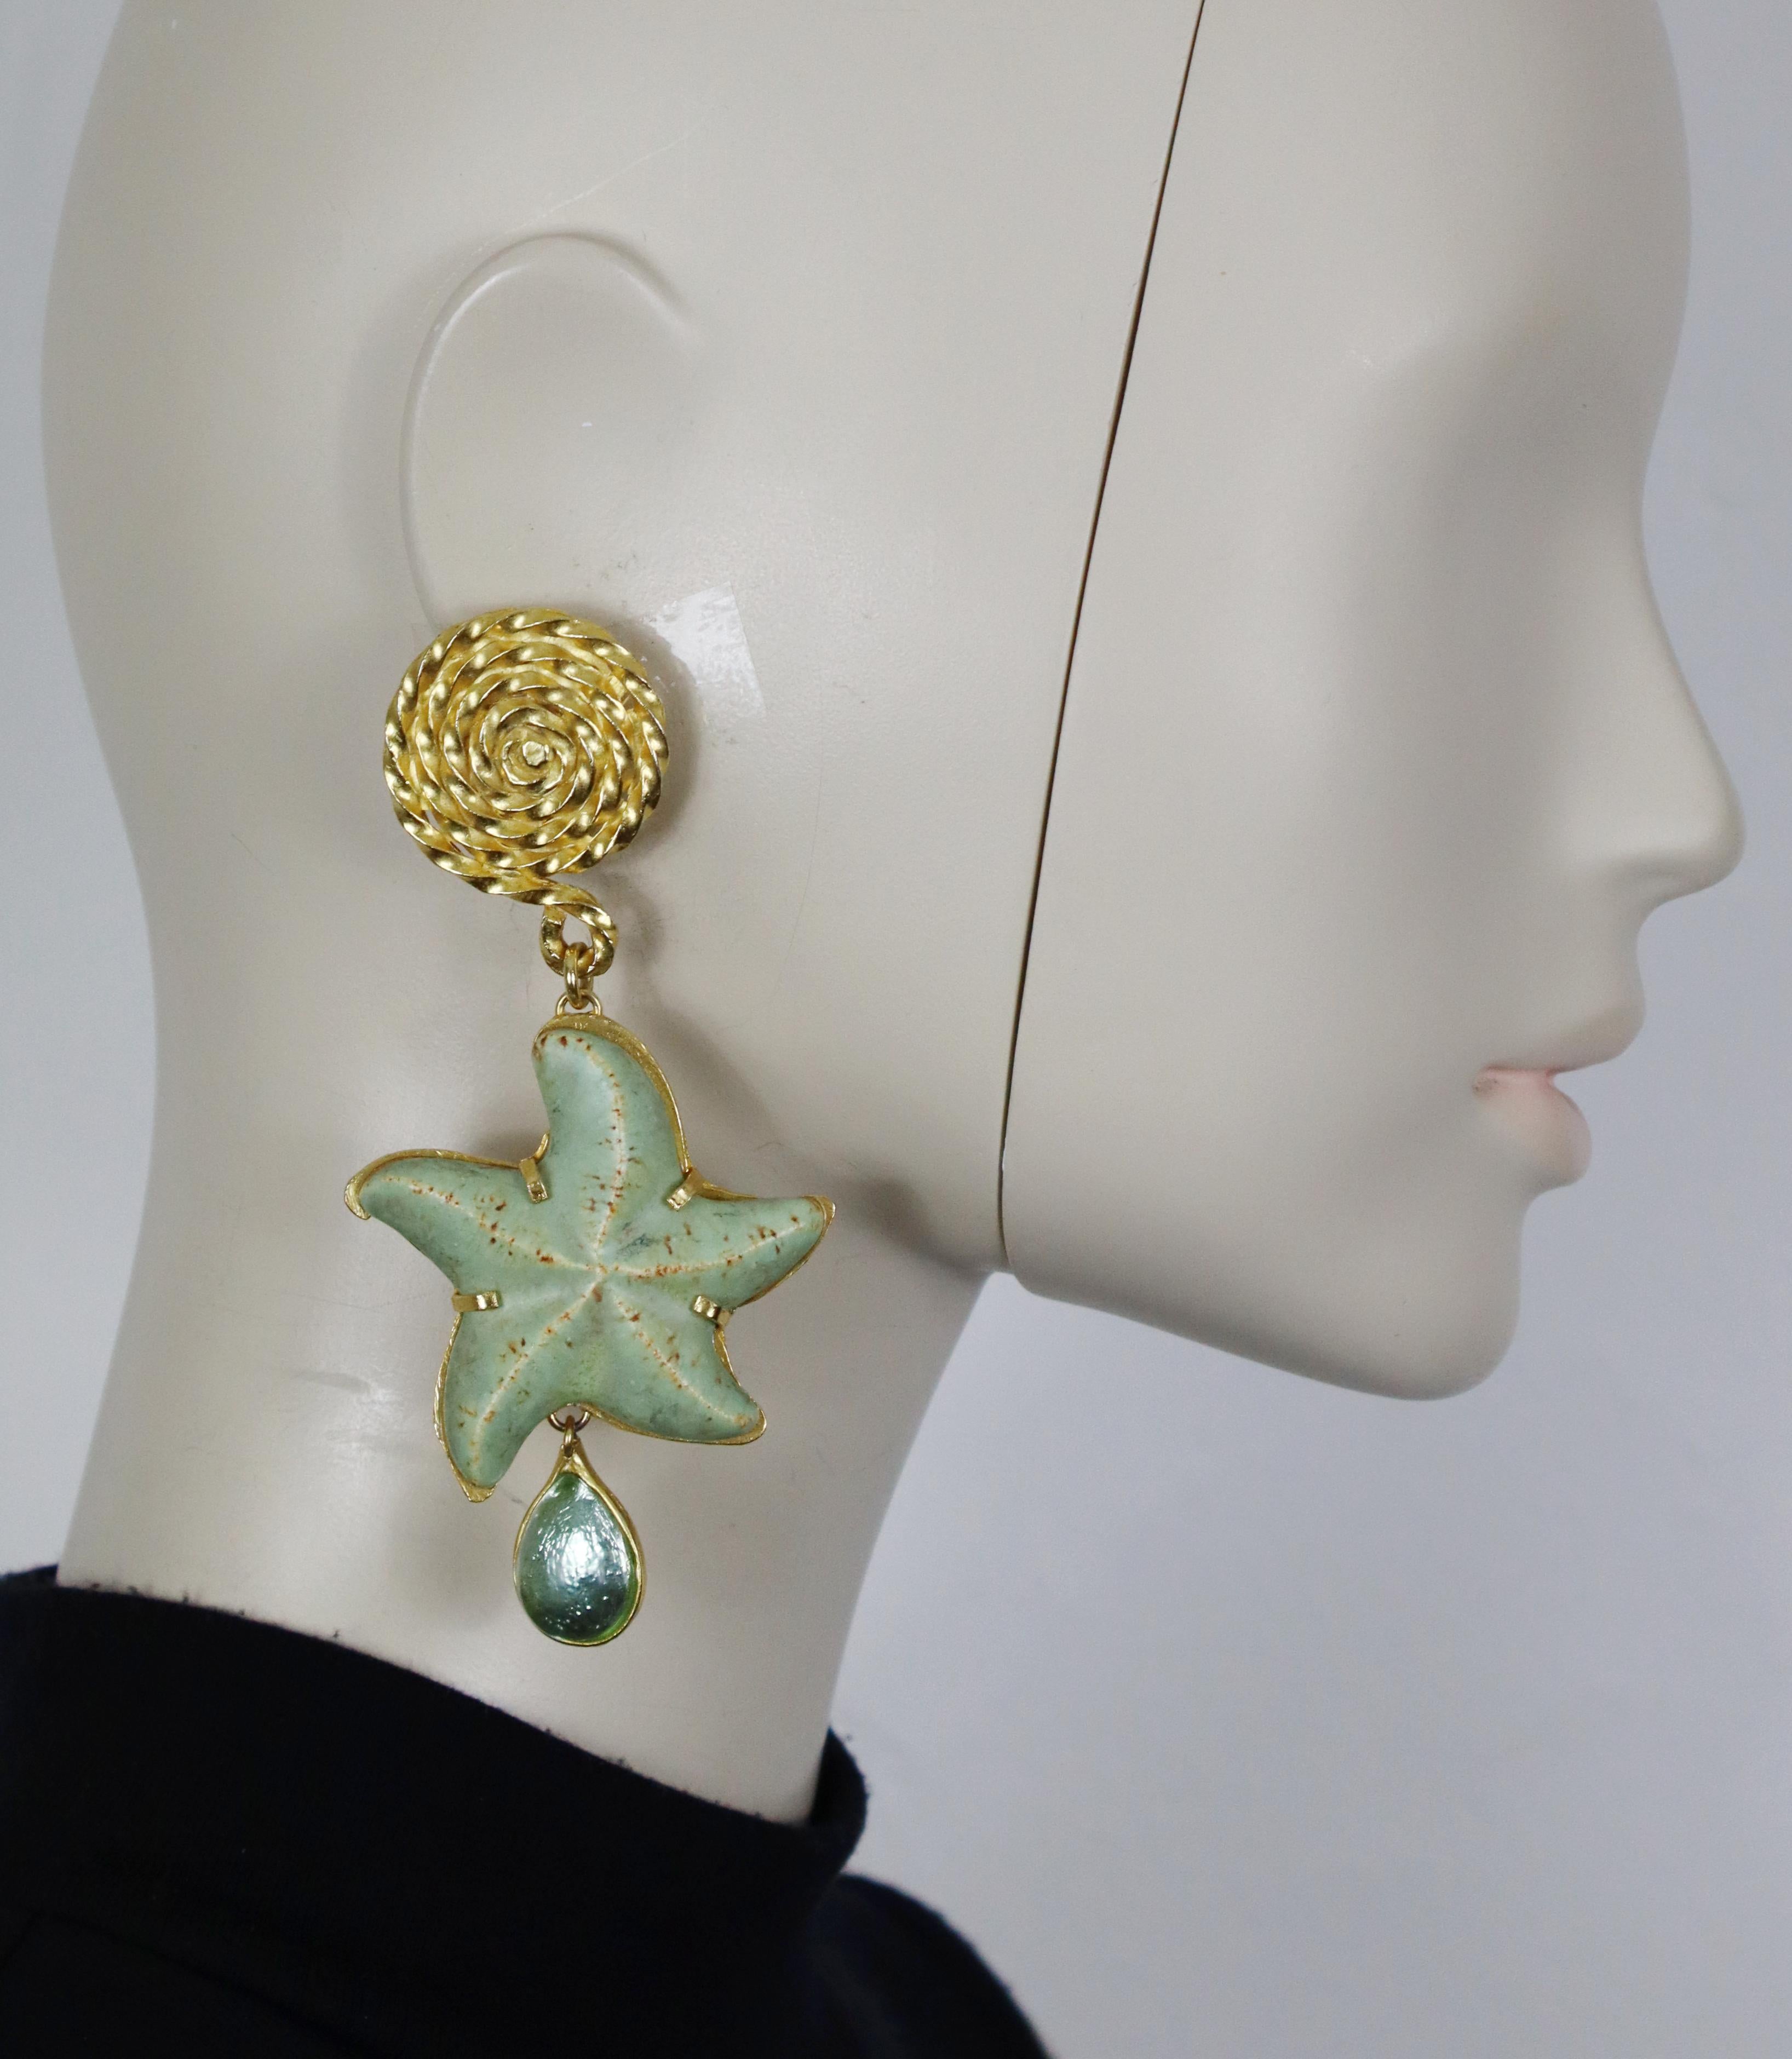 YVES SAINT LAURENT vintage massive gold tone dangling earrings (clip-on) featuring a ceramic starfish and a glass cabochon drop.

Embossed YVES SAINT LAURENT Rive Gauche.
Made in France.

Indicative measurements : height approx. 11 cm (4.33 inches)